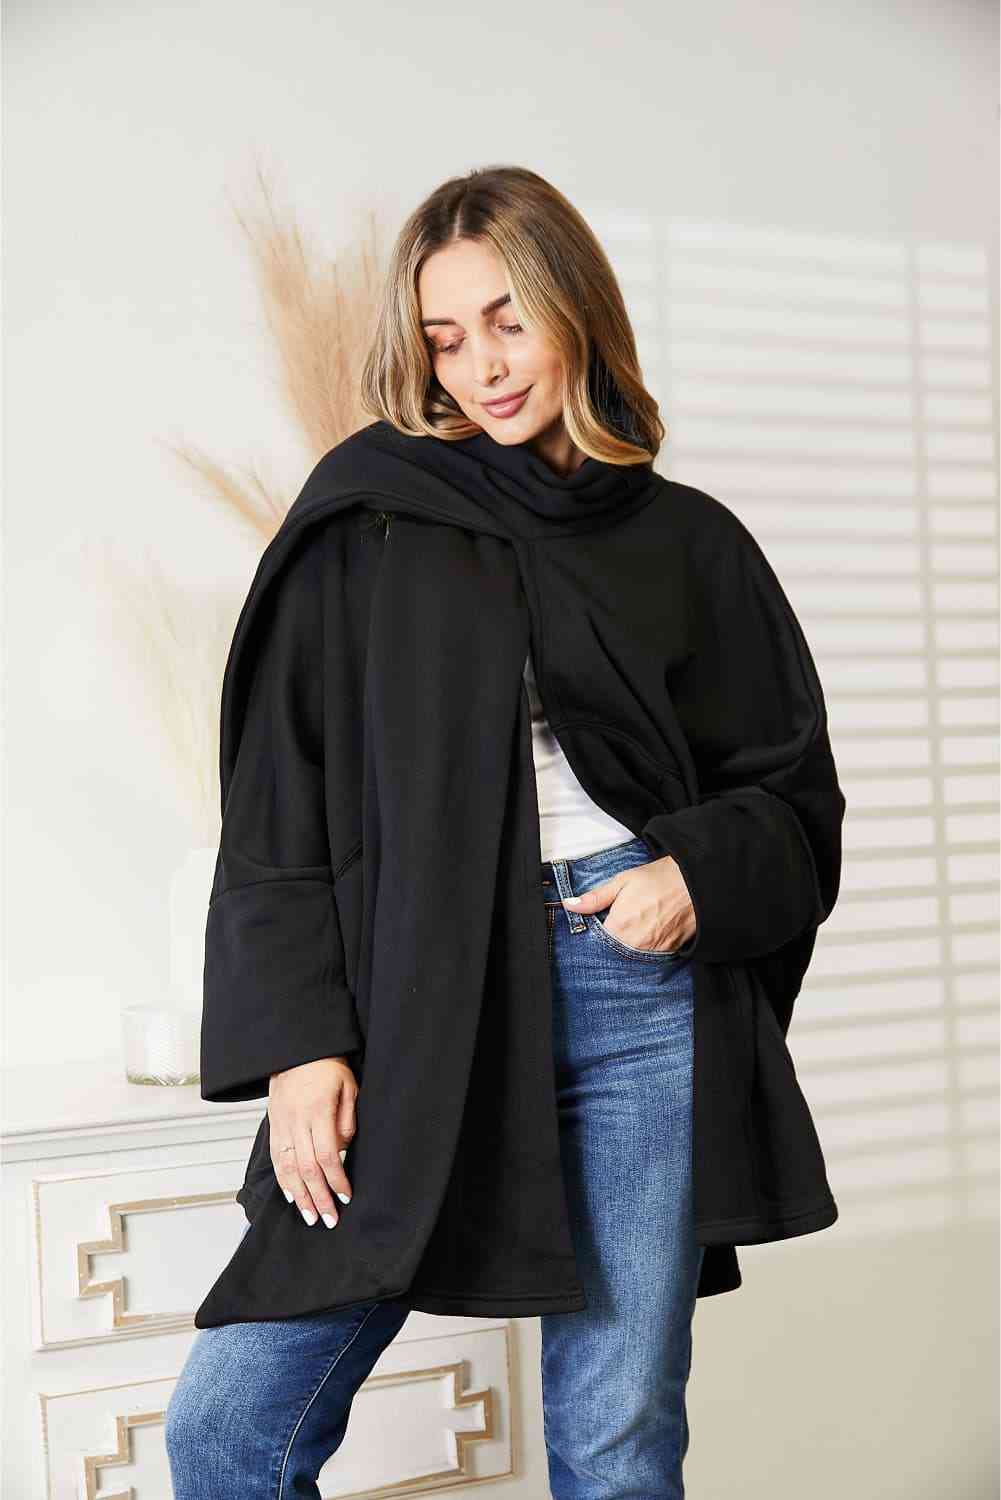 Open Front Cardigan with Scarf Design - Black / S/M - Women’s Clothing & Accessories - Shirts & Tops - 1 - 2024